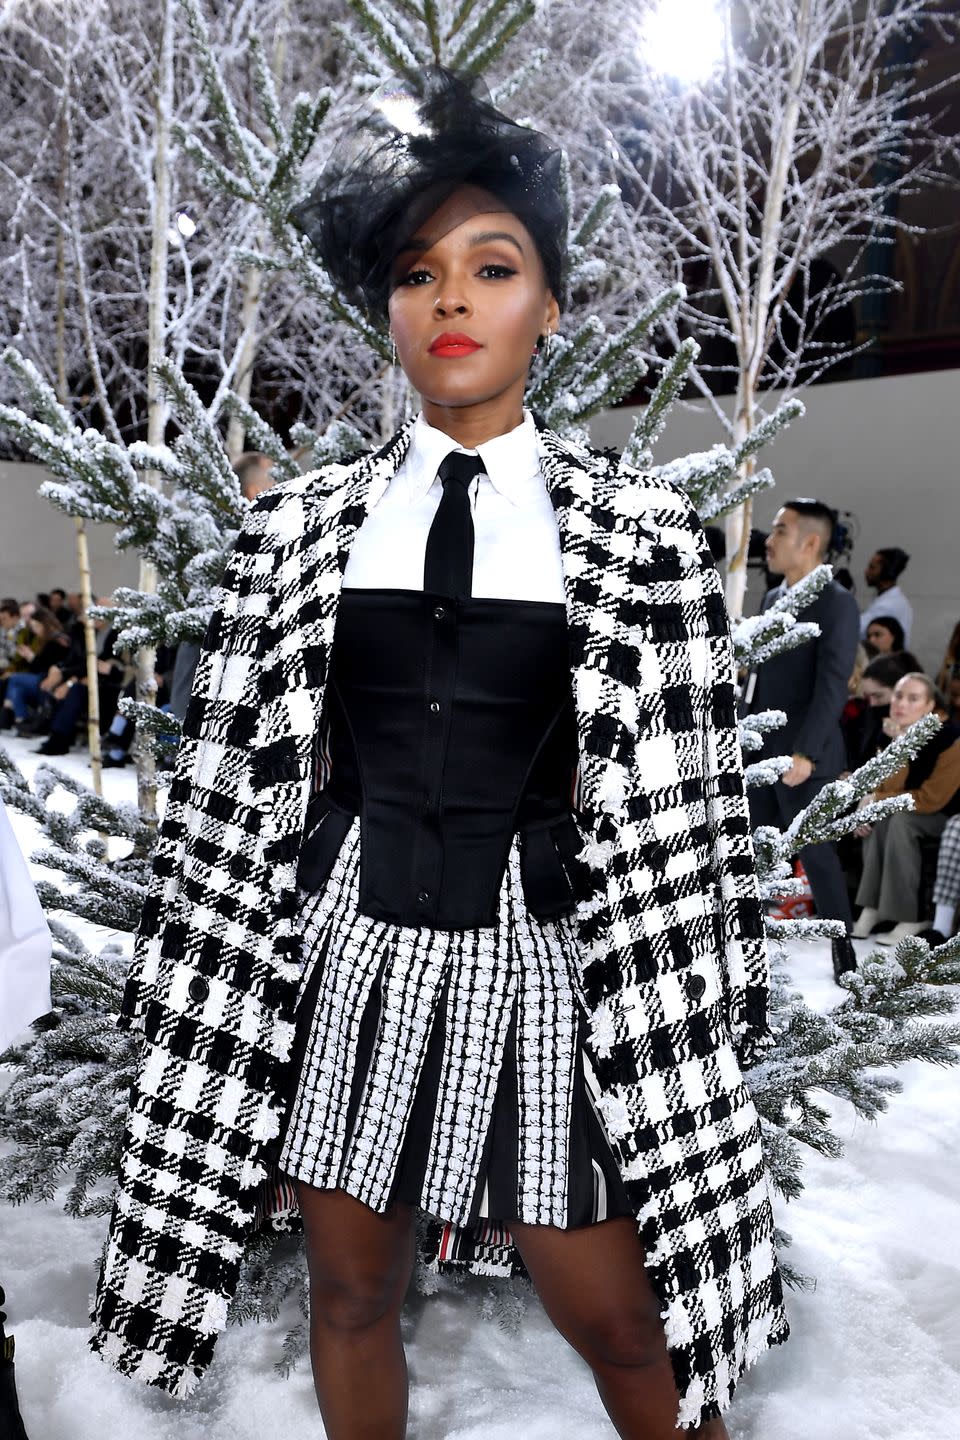 Janelle Monáe — The American Who Could Get It